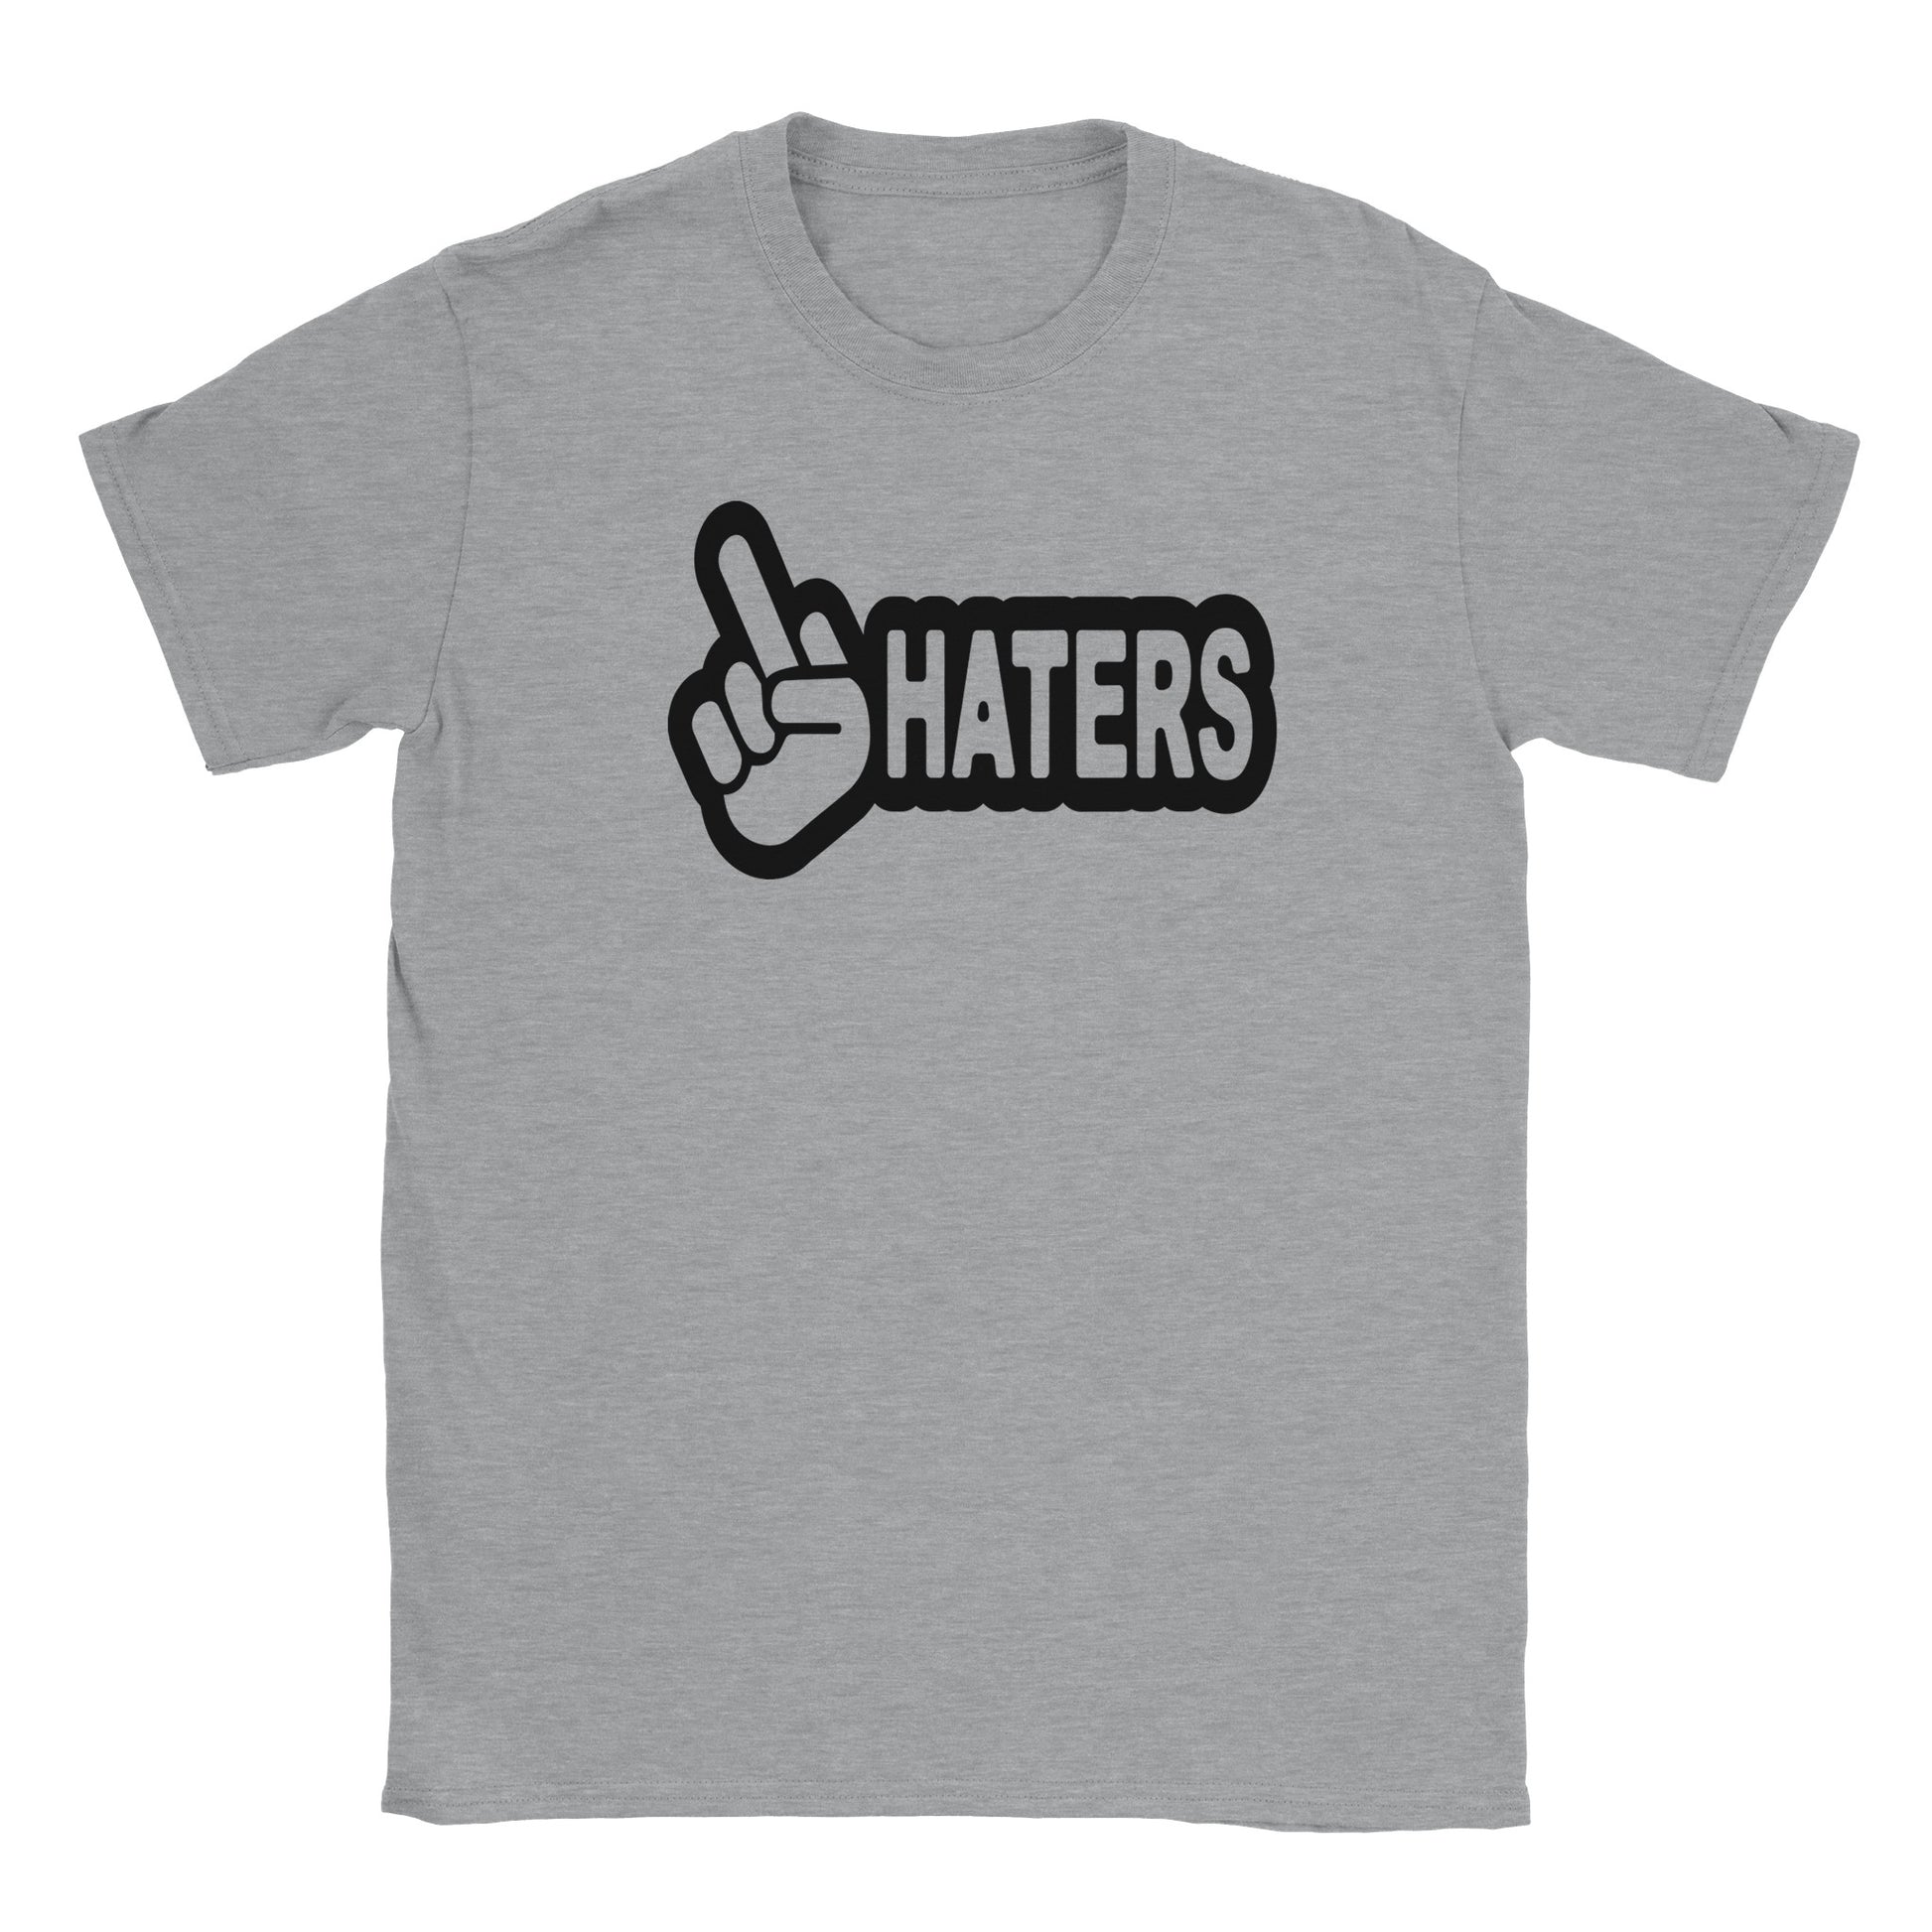 F Haters T-shirt - Mister Snarky's